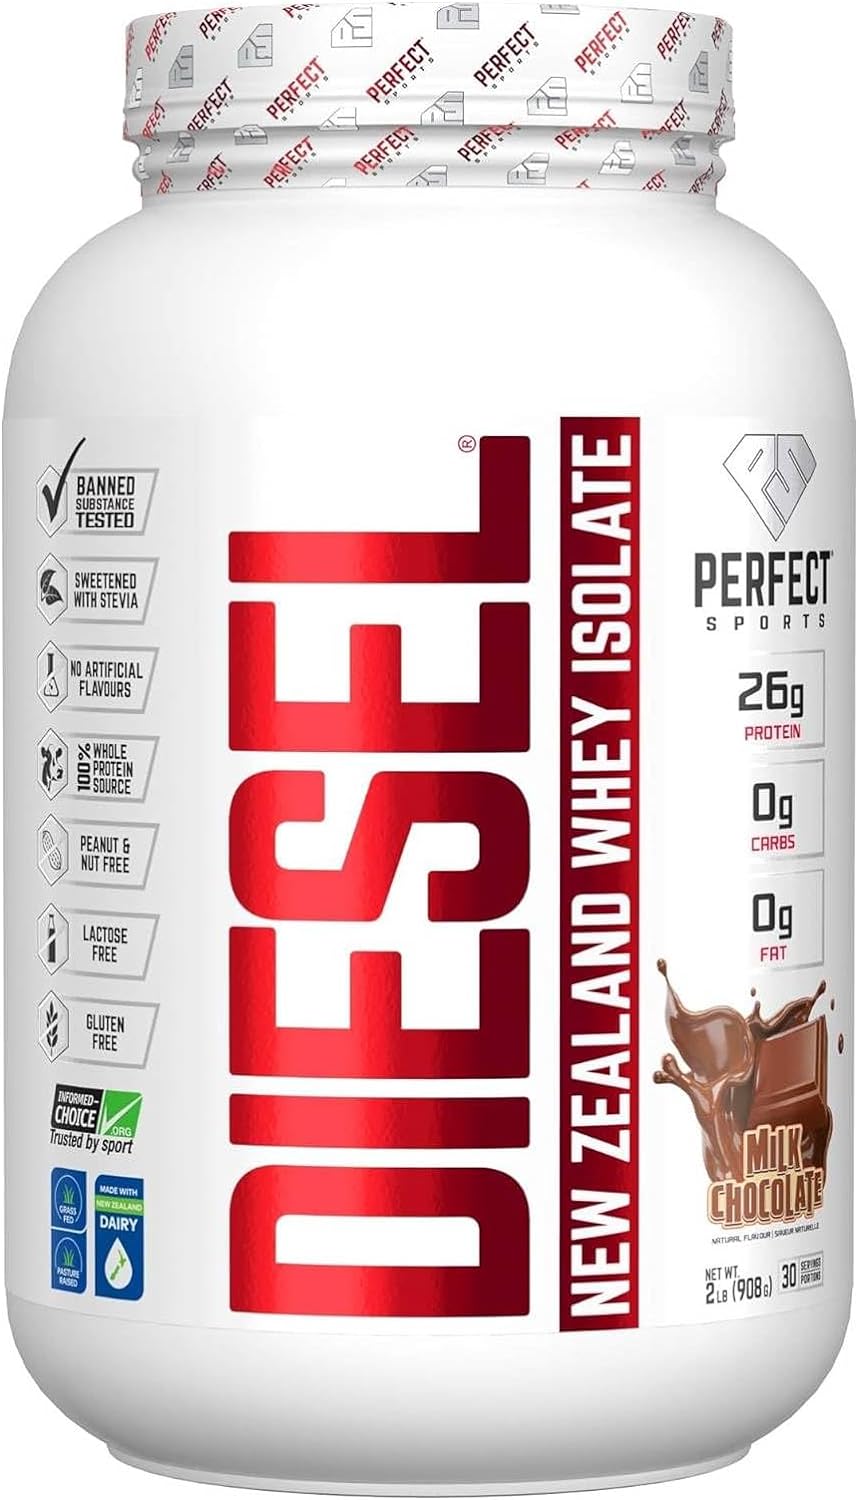 PERFECT SPORTS Diesel New Zealand Whey Isolate, 2 lbs, Milk Chocolate